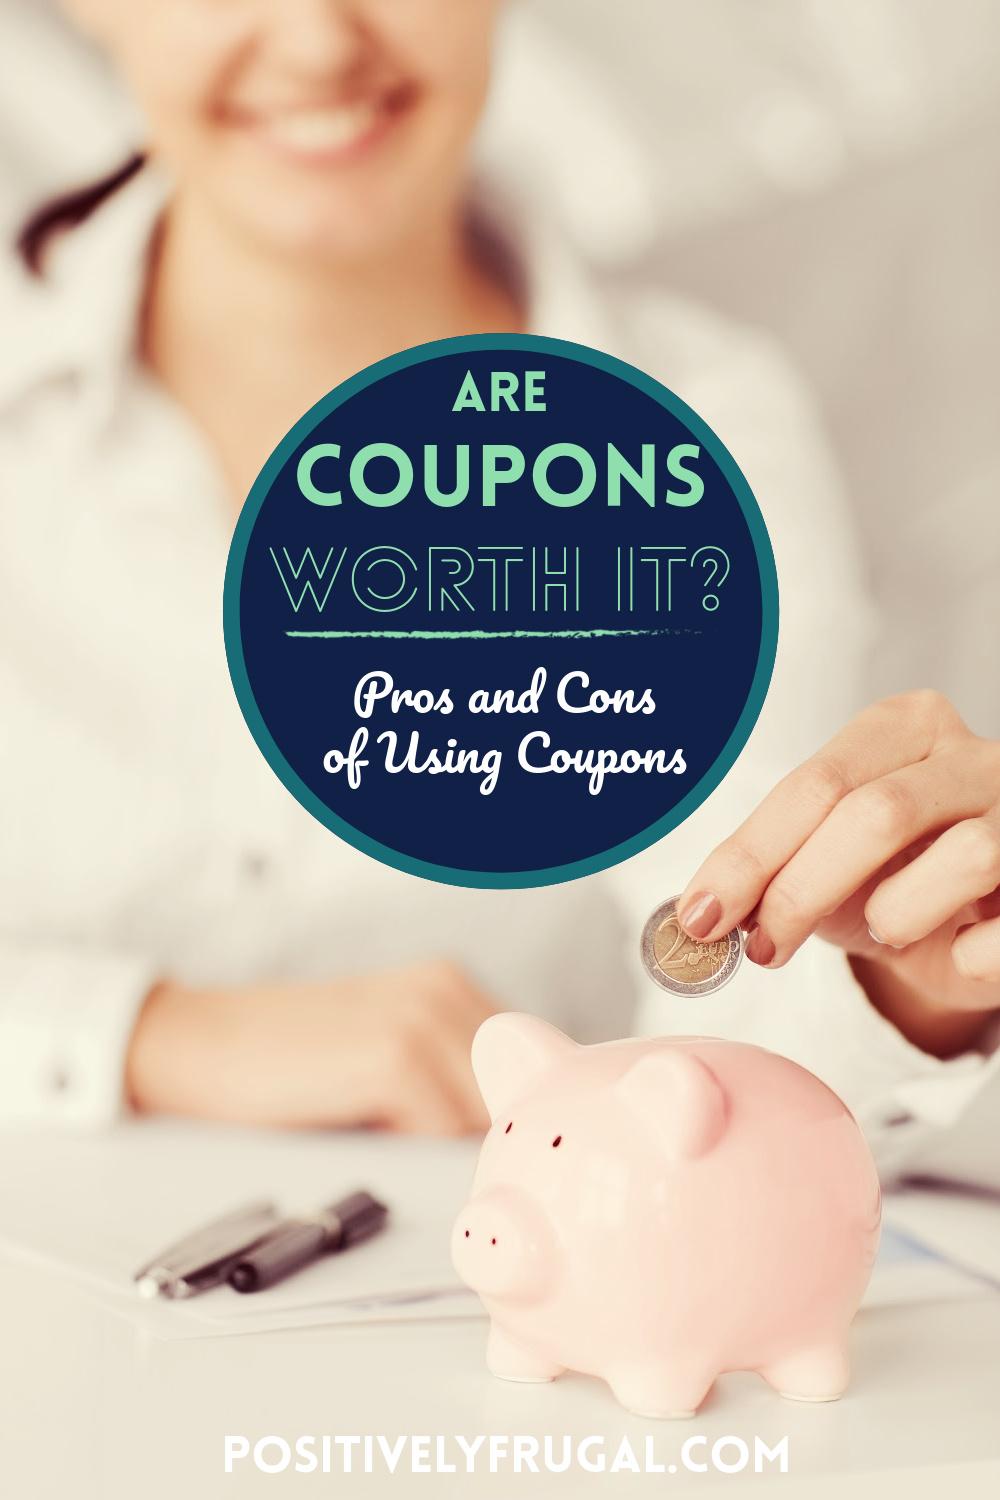 Are Coupons worth it Pros and Cons of Using Coupons